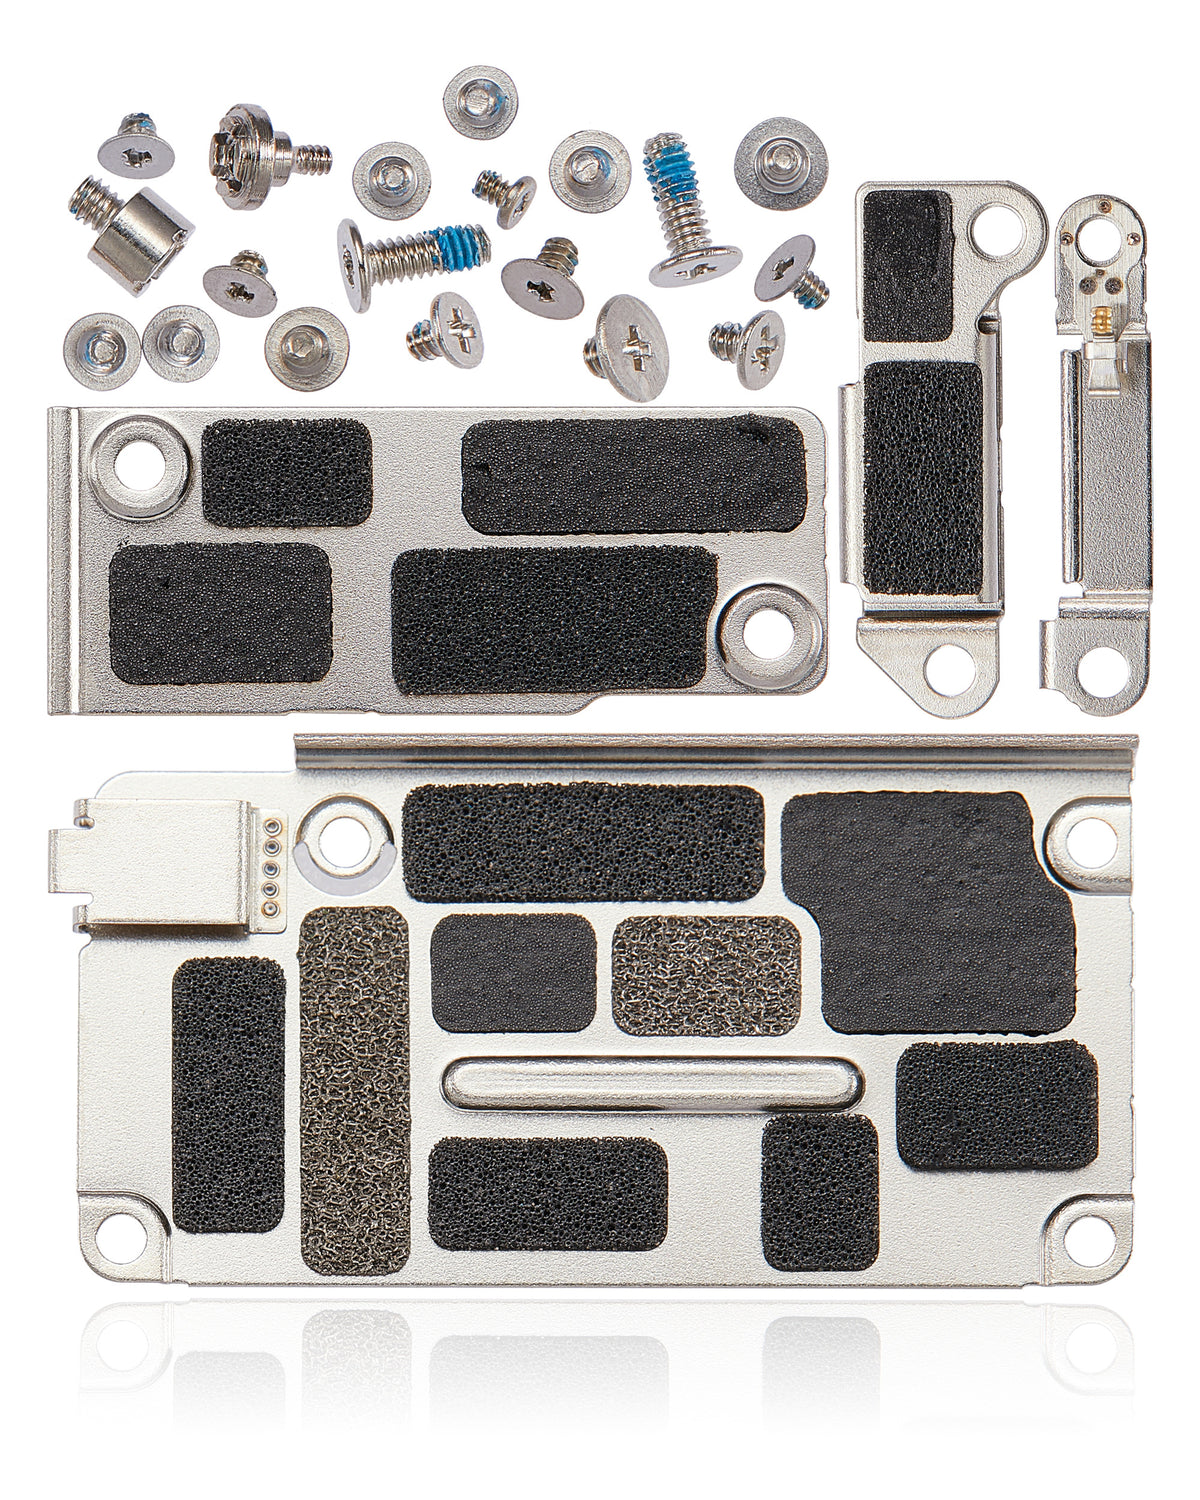 SMALL METAL BRACKET (ON MOTHERBOARD) COMPATIBLE WITH IPHONE 12 / 12 PRO